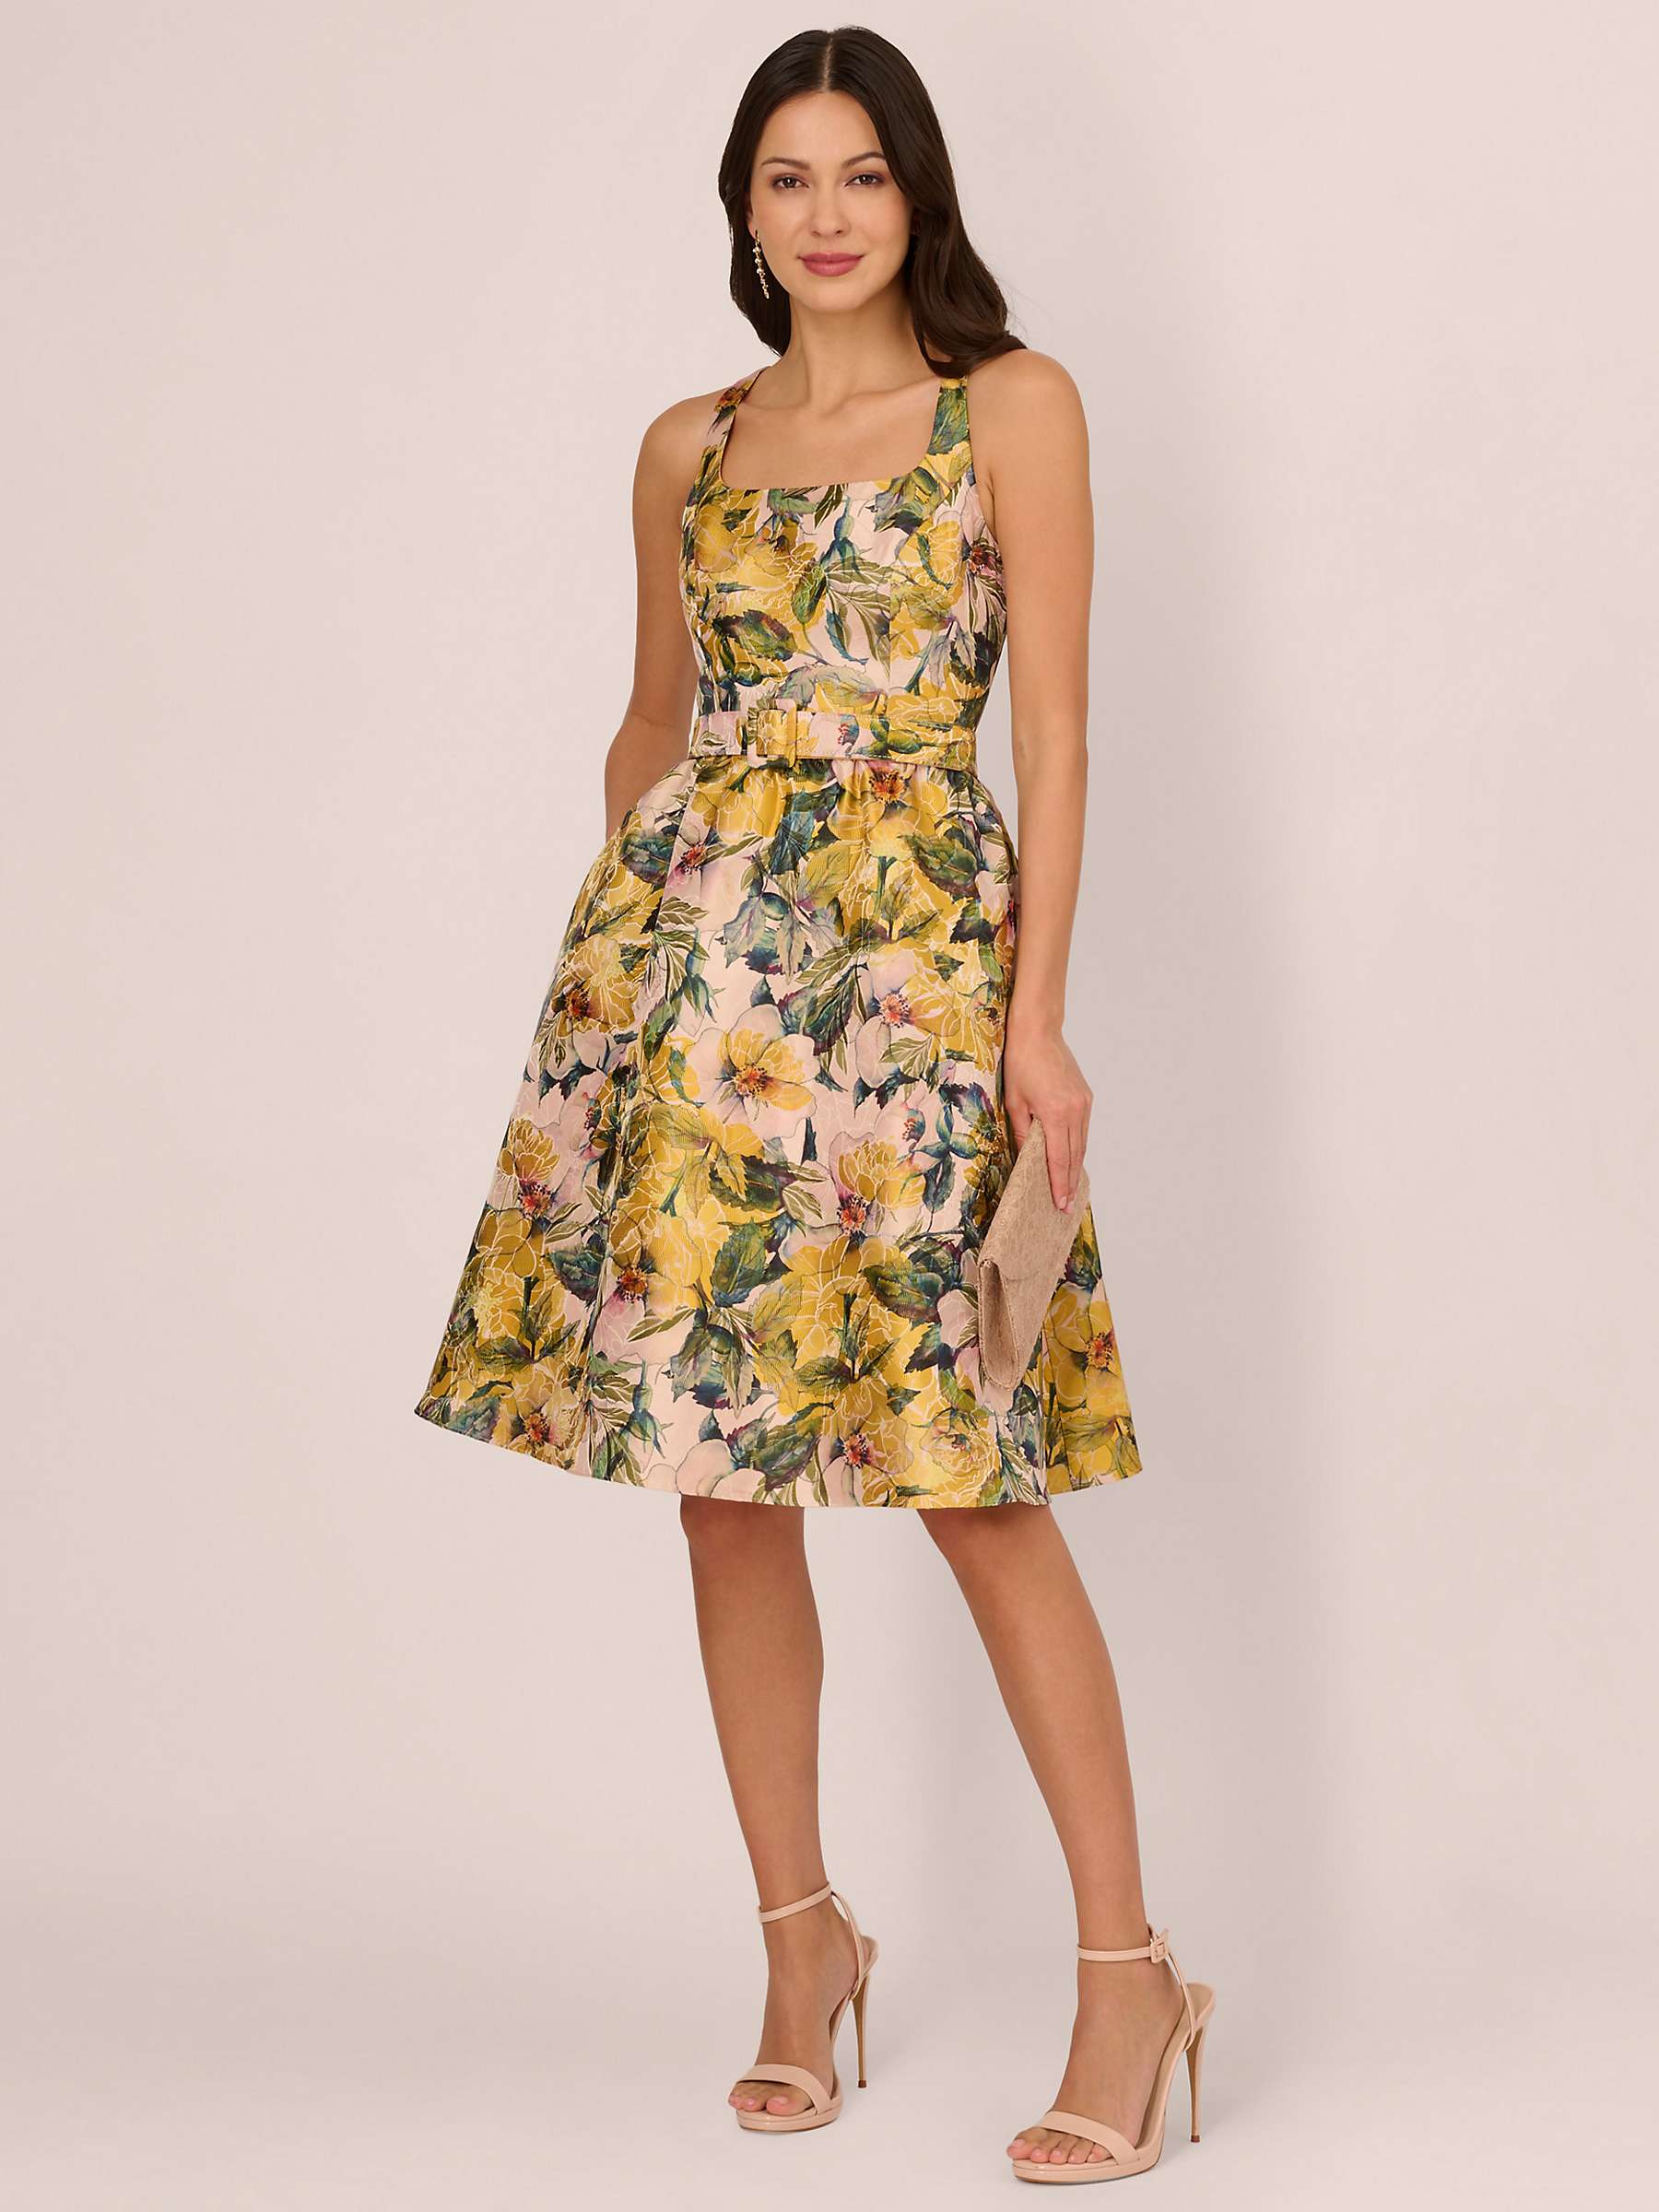 Buy Adrianna Papell Jacquard Floral Flared Dress, Yellow/Multi Online at johnlewis.com